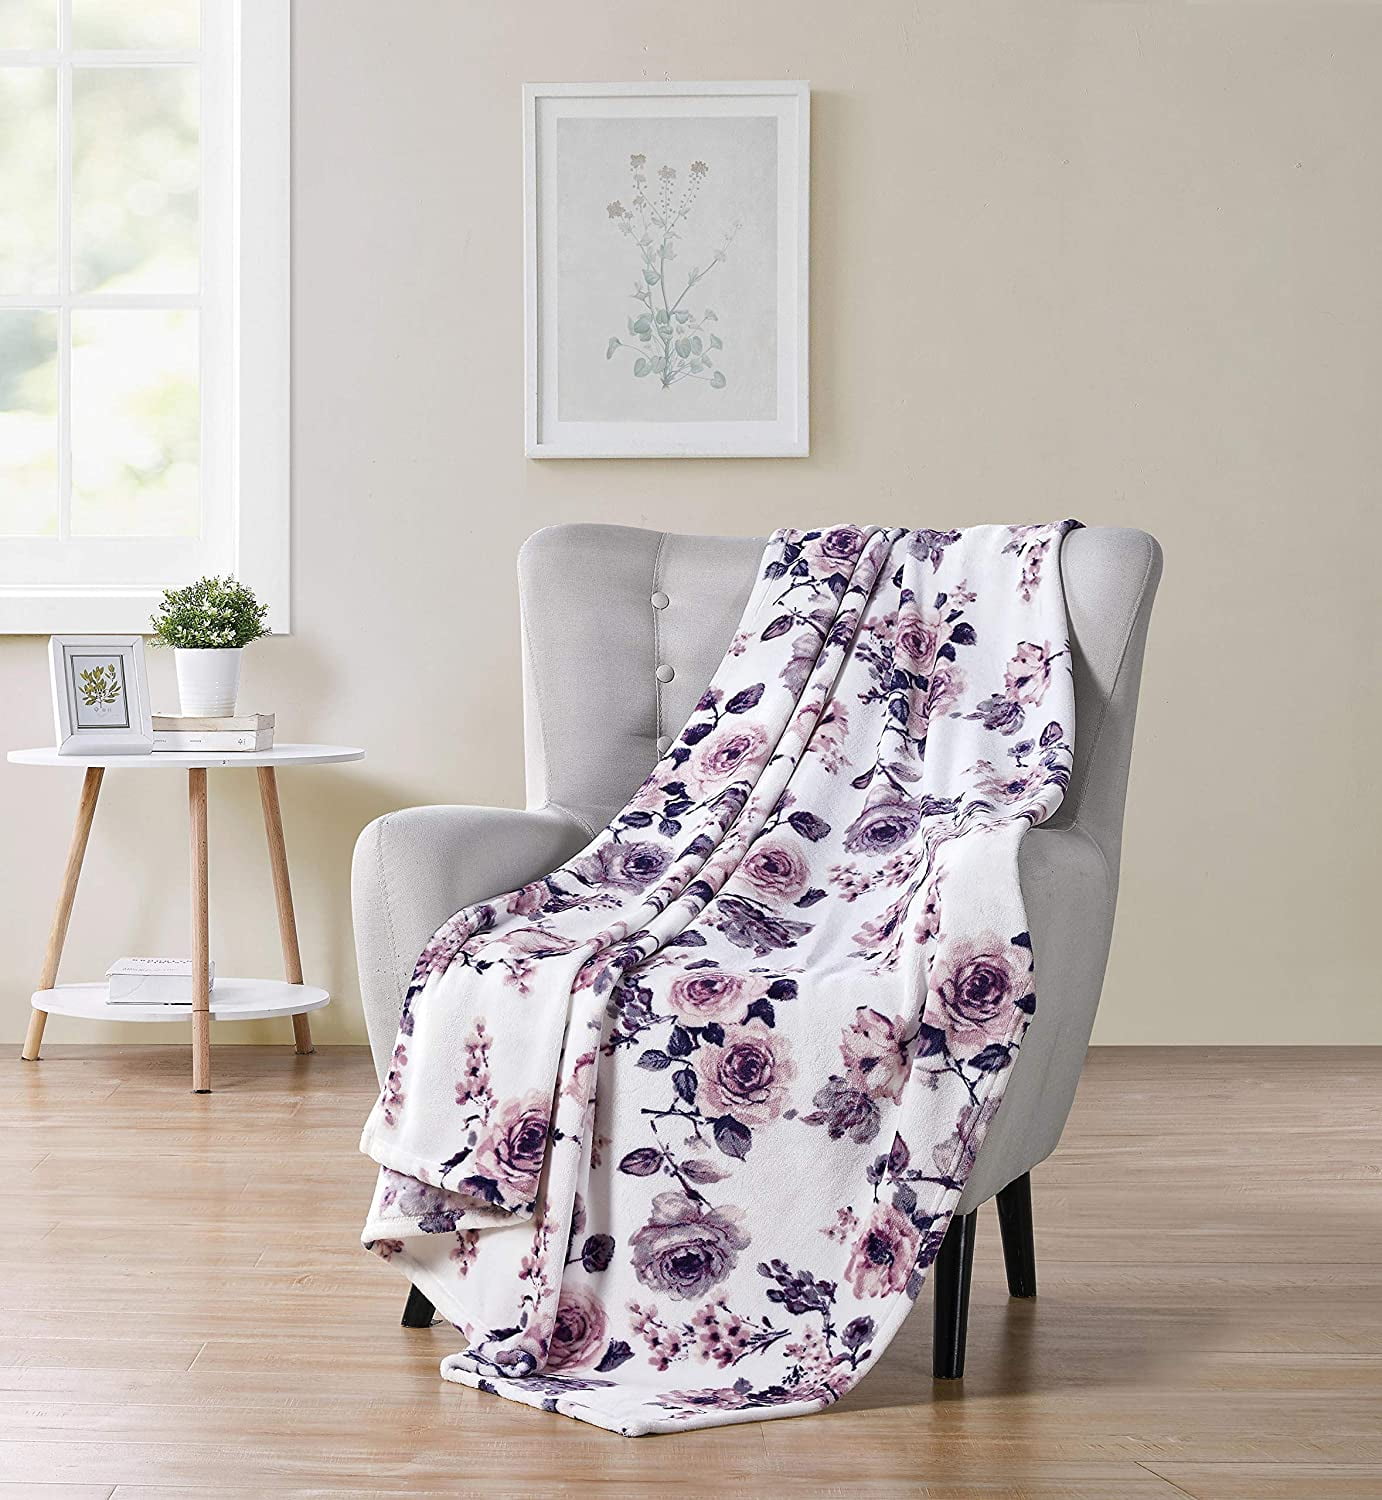 Serafina Home Decorative Throw Blankets: Soft Plush Lively Rose Floral ...